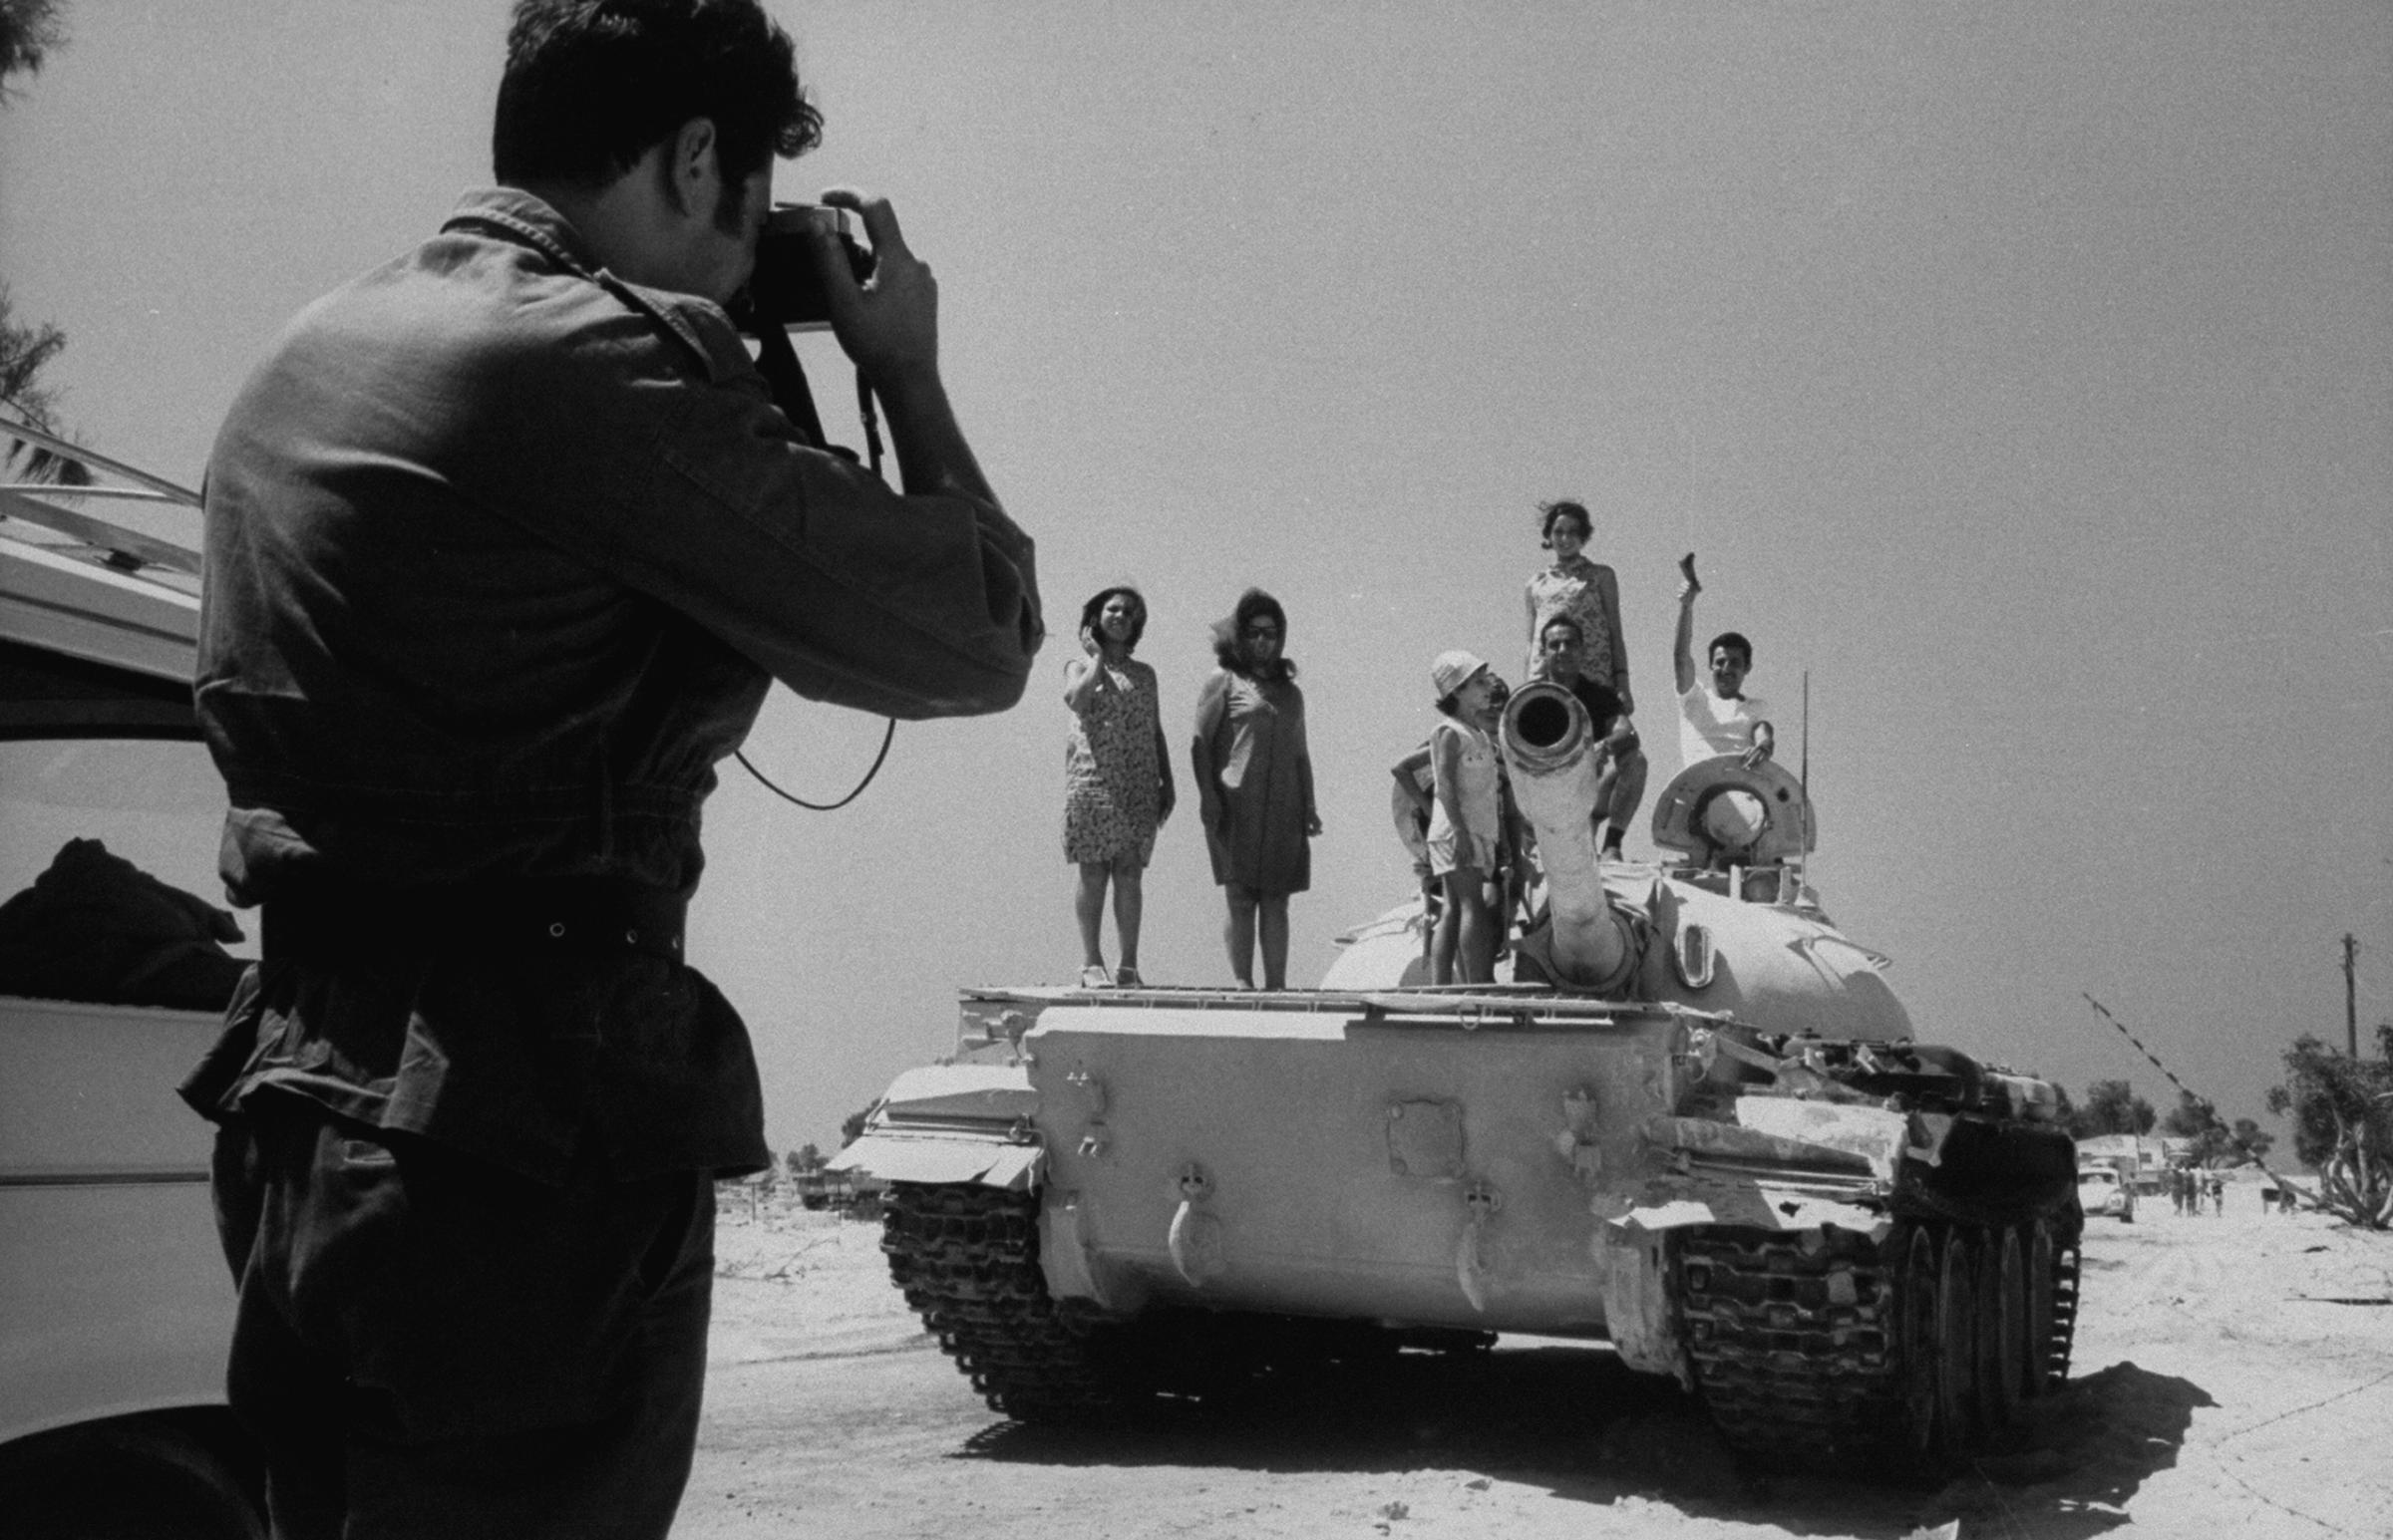 Israeli tourists inspecting captured Egyptian weapons, on their visit to Gaza after the war, 1967.